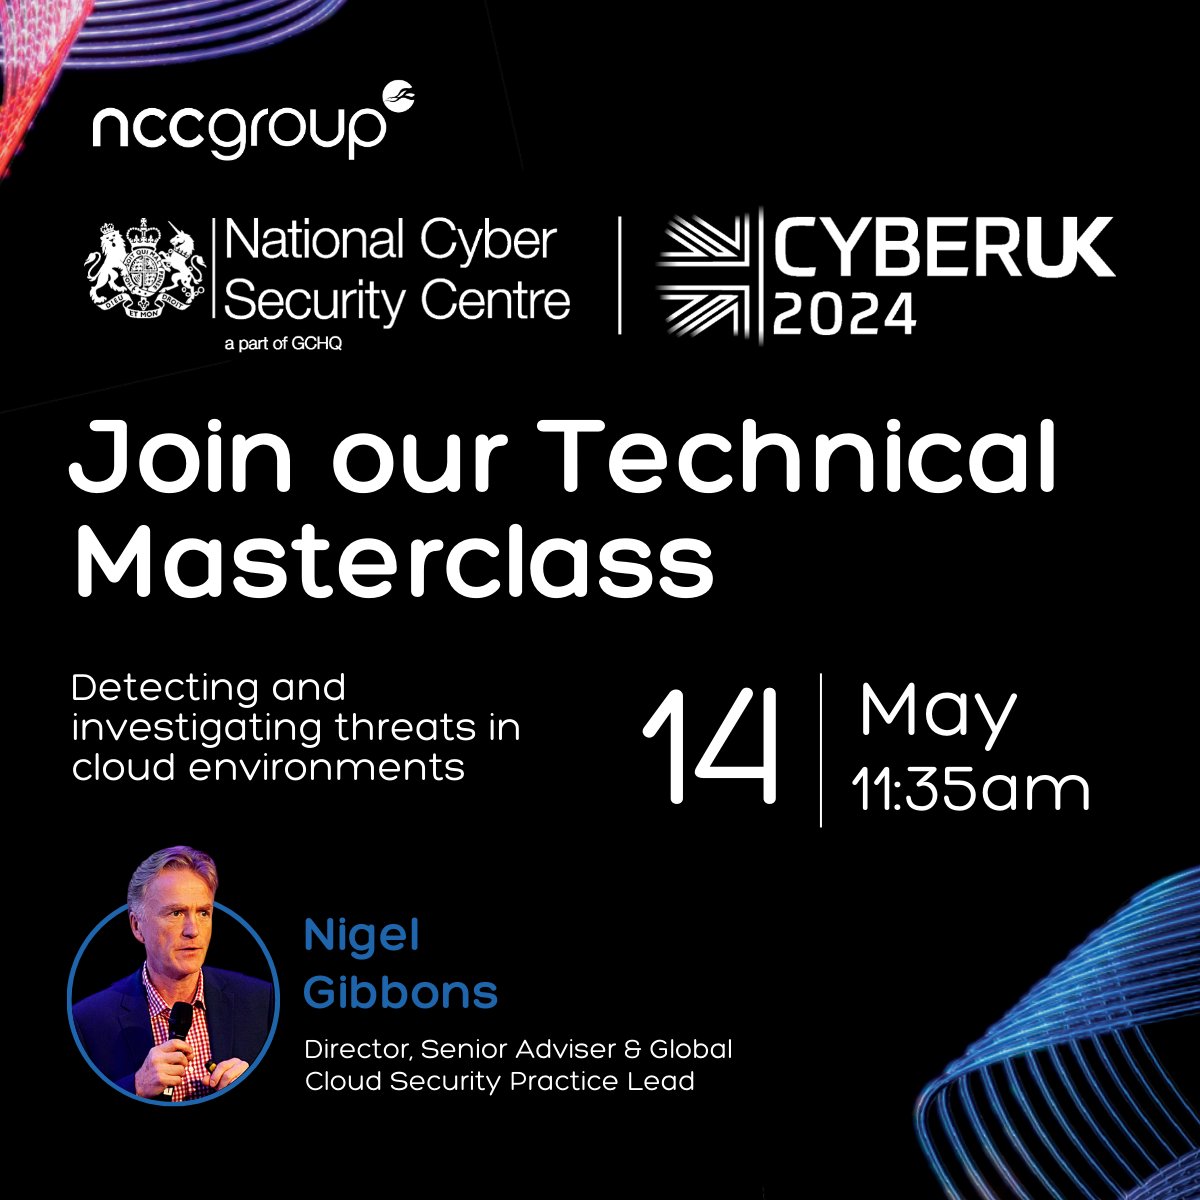 During the #CYBERUK Technical Masterclass series, Nigel Gibbons will join an in-depth session focused on dealing with #cyberthreat in #cloud environments.

Learn more about our sponsorship of @NCSC's  CYBERUK here: bit.ly/cyberUK24